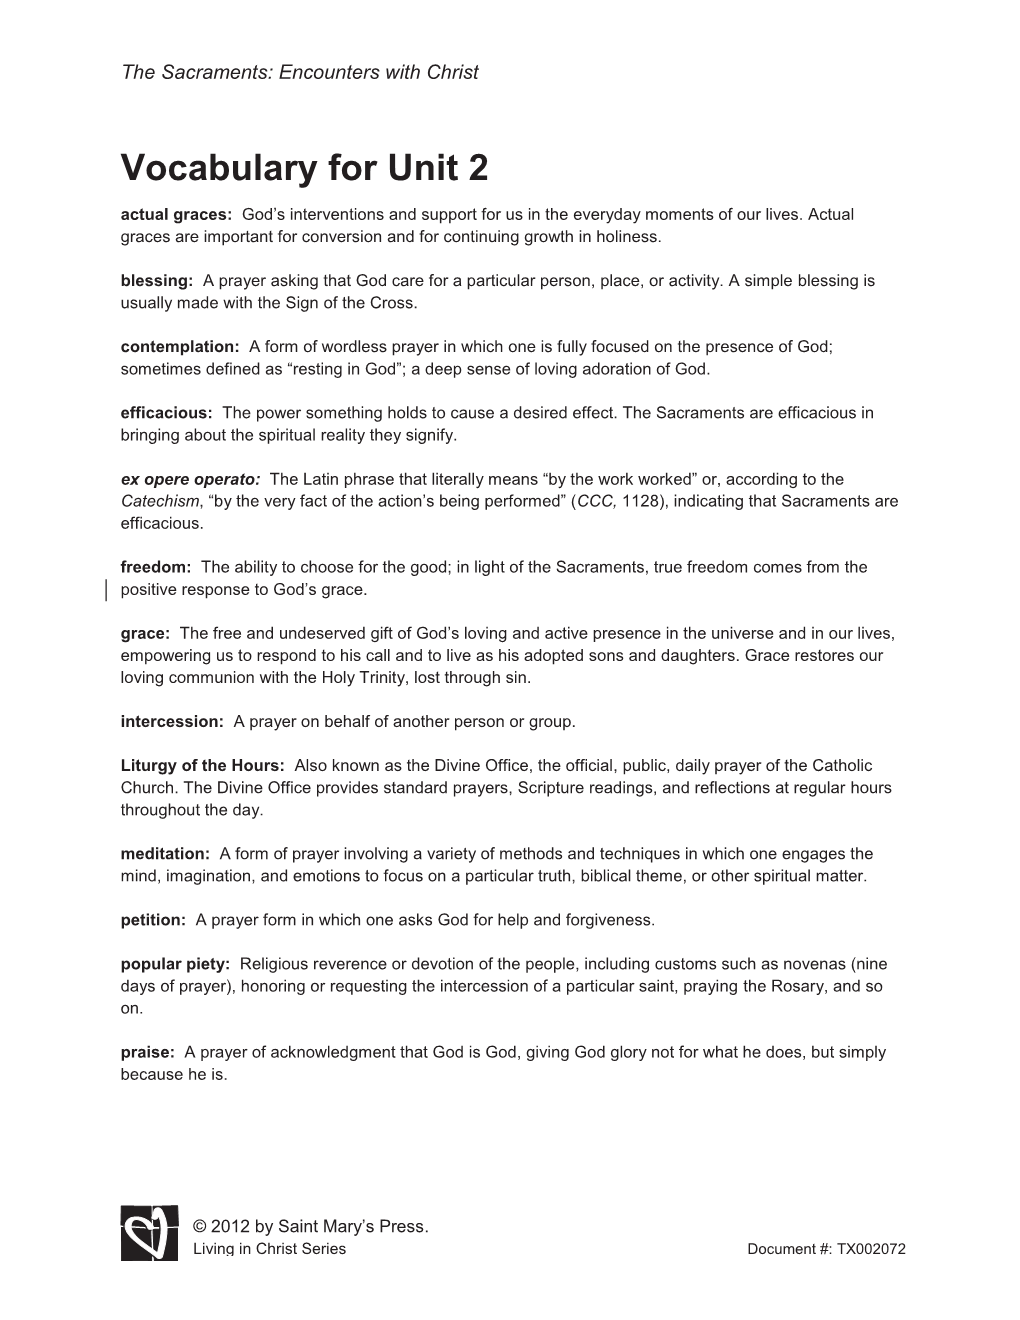 Vocabulary for Unit 2 Actual Graces: God’S Interventions and Support for Us in the Everyday Moments of Our Lives